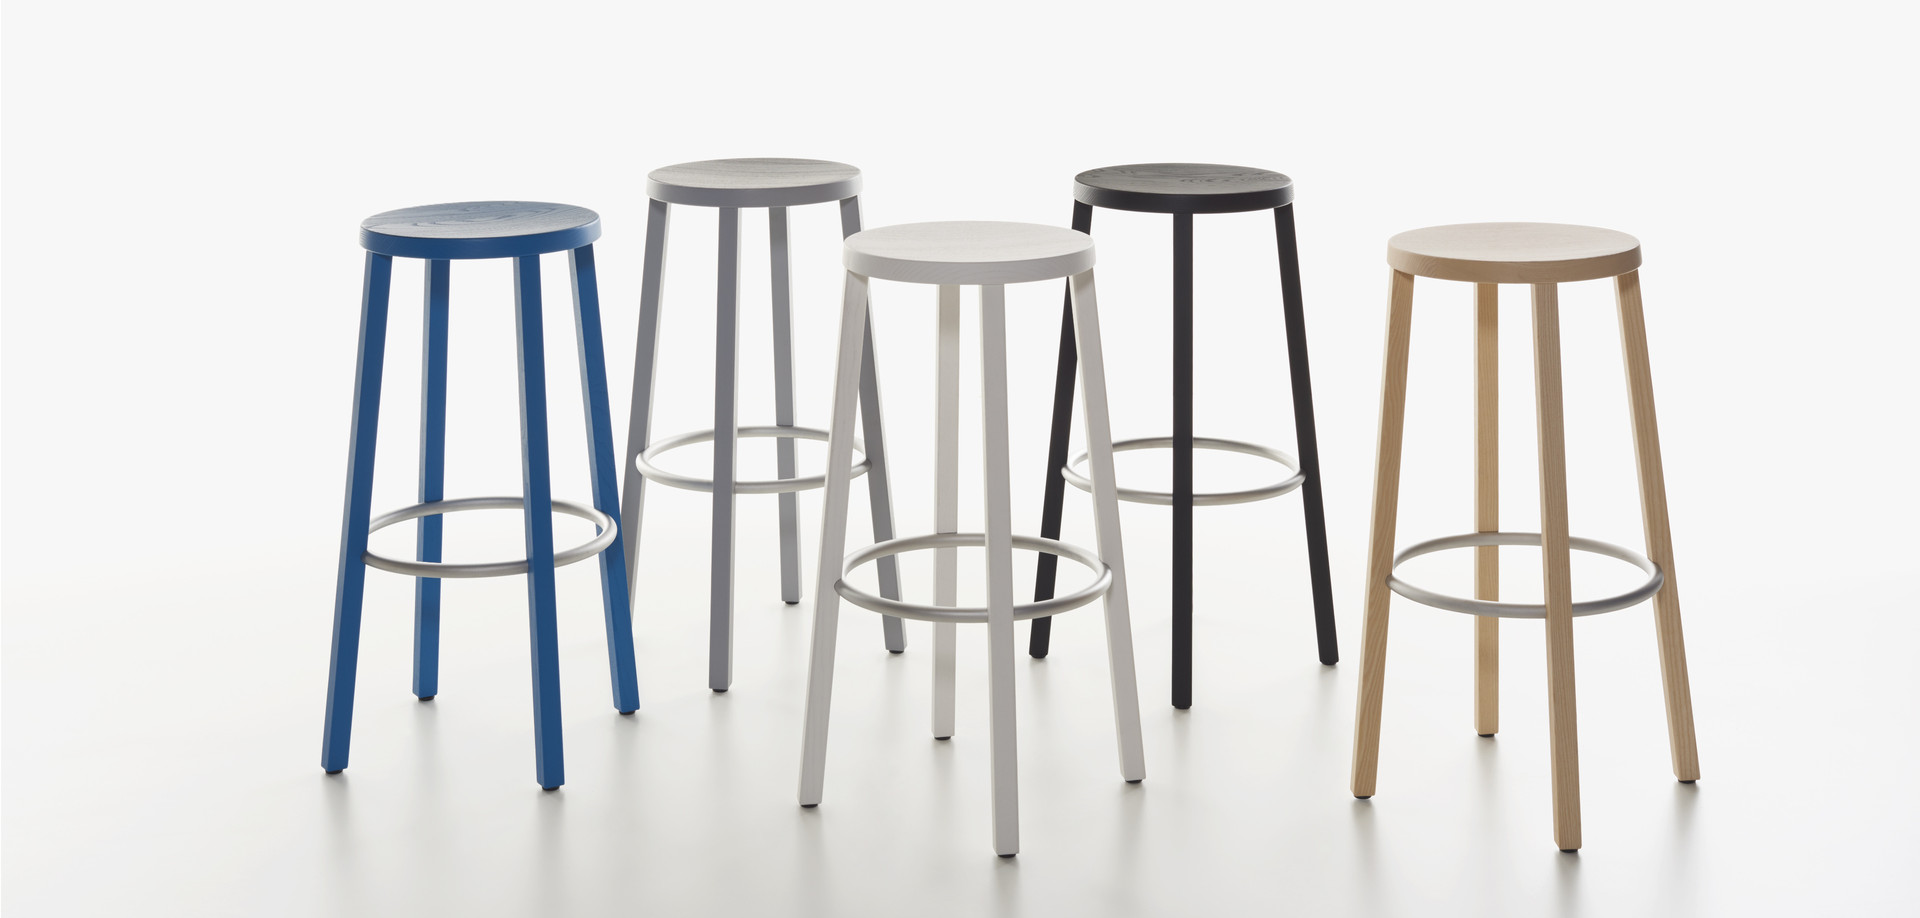 Plank - BLOCCO stool in the colors ash natural, black, grey, white and blue.